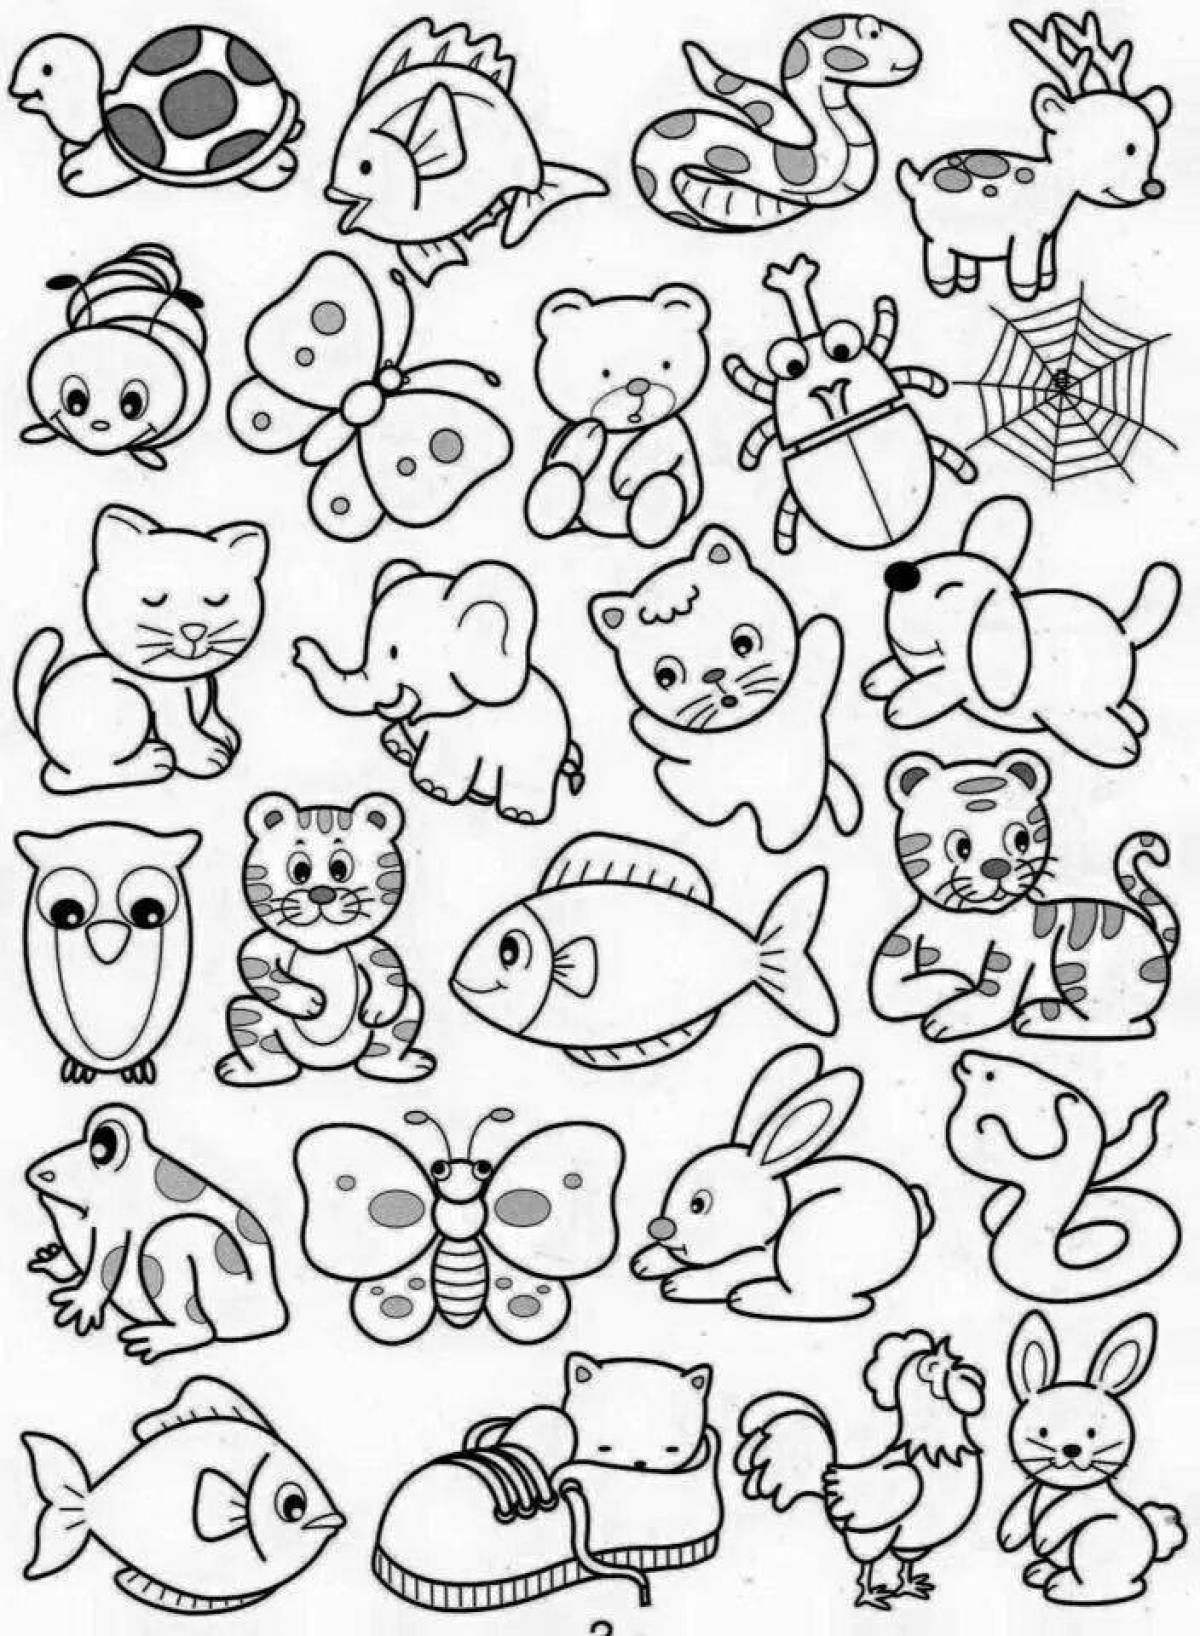 Funny little cute coloring book